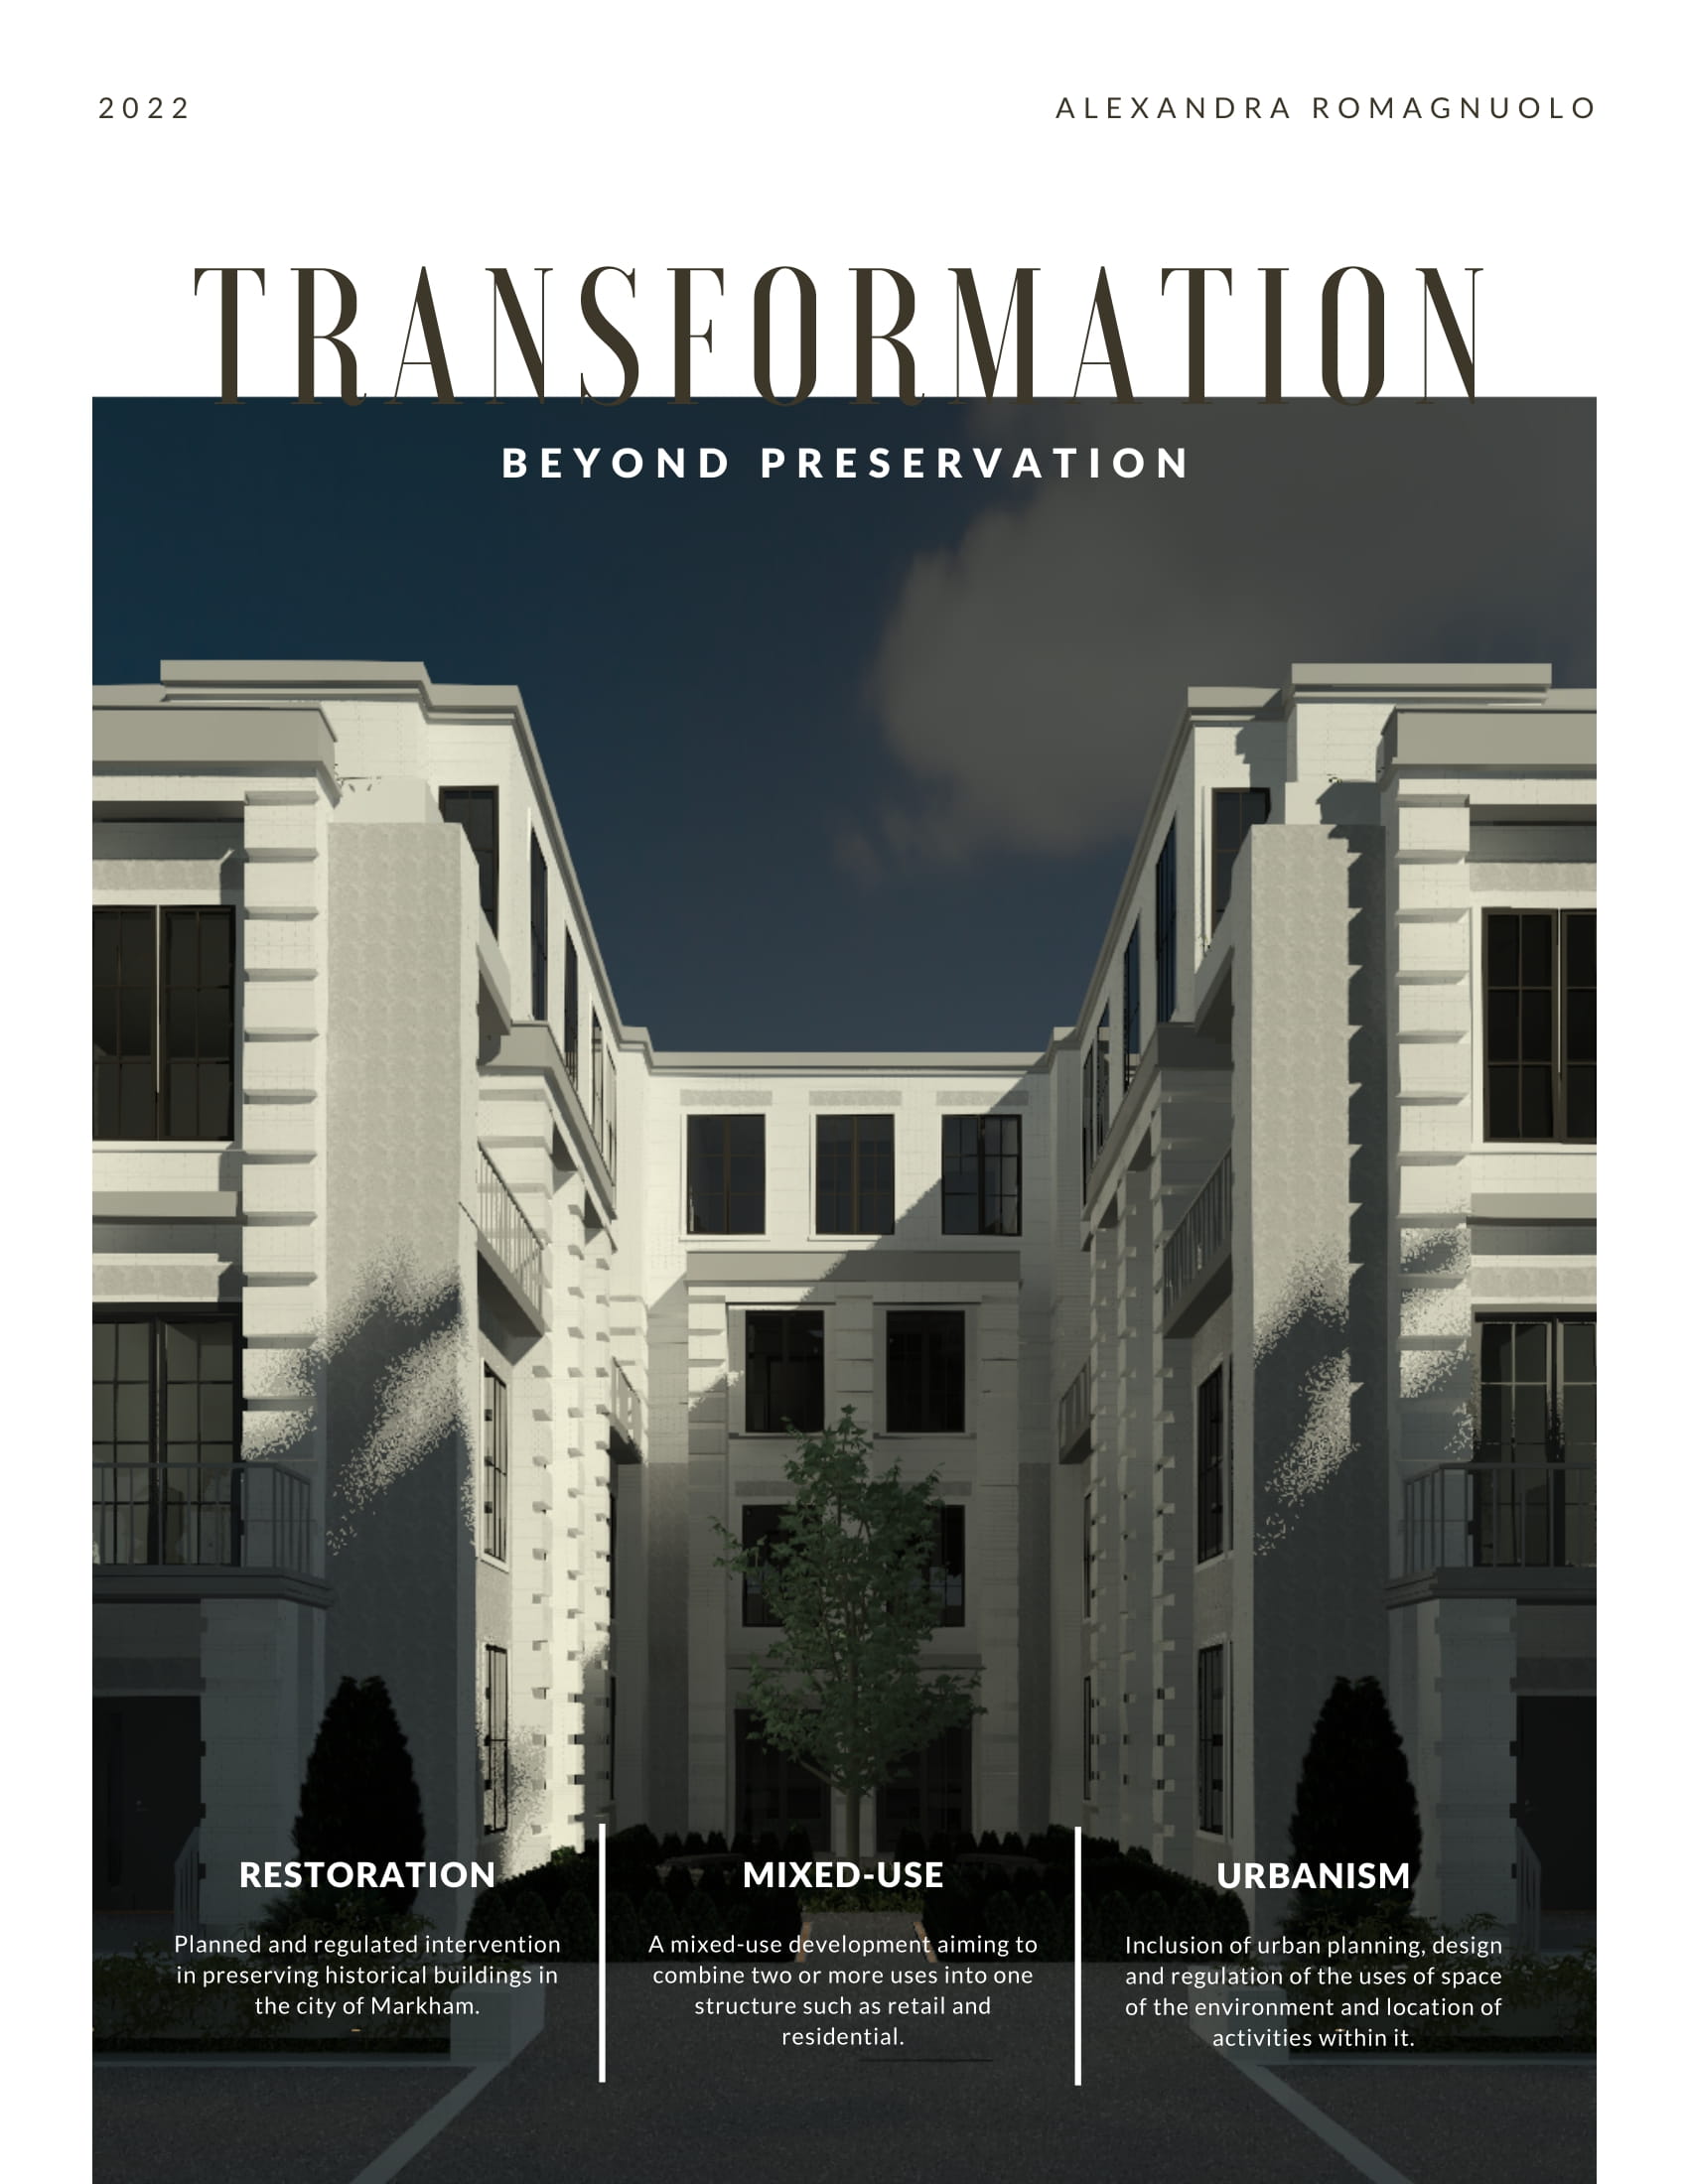 01 For Jurying Consideration: Transformation Beyond Preservation